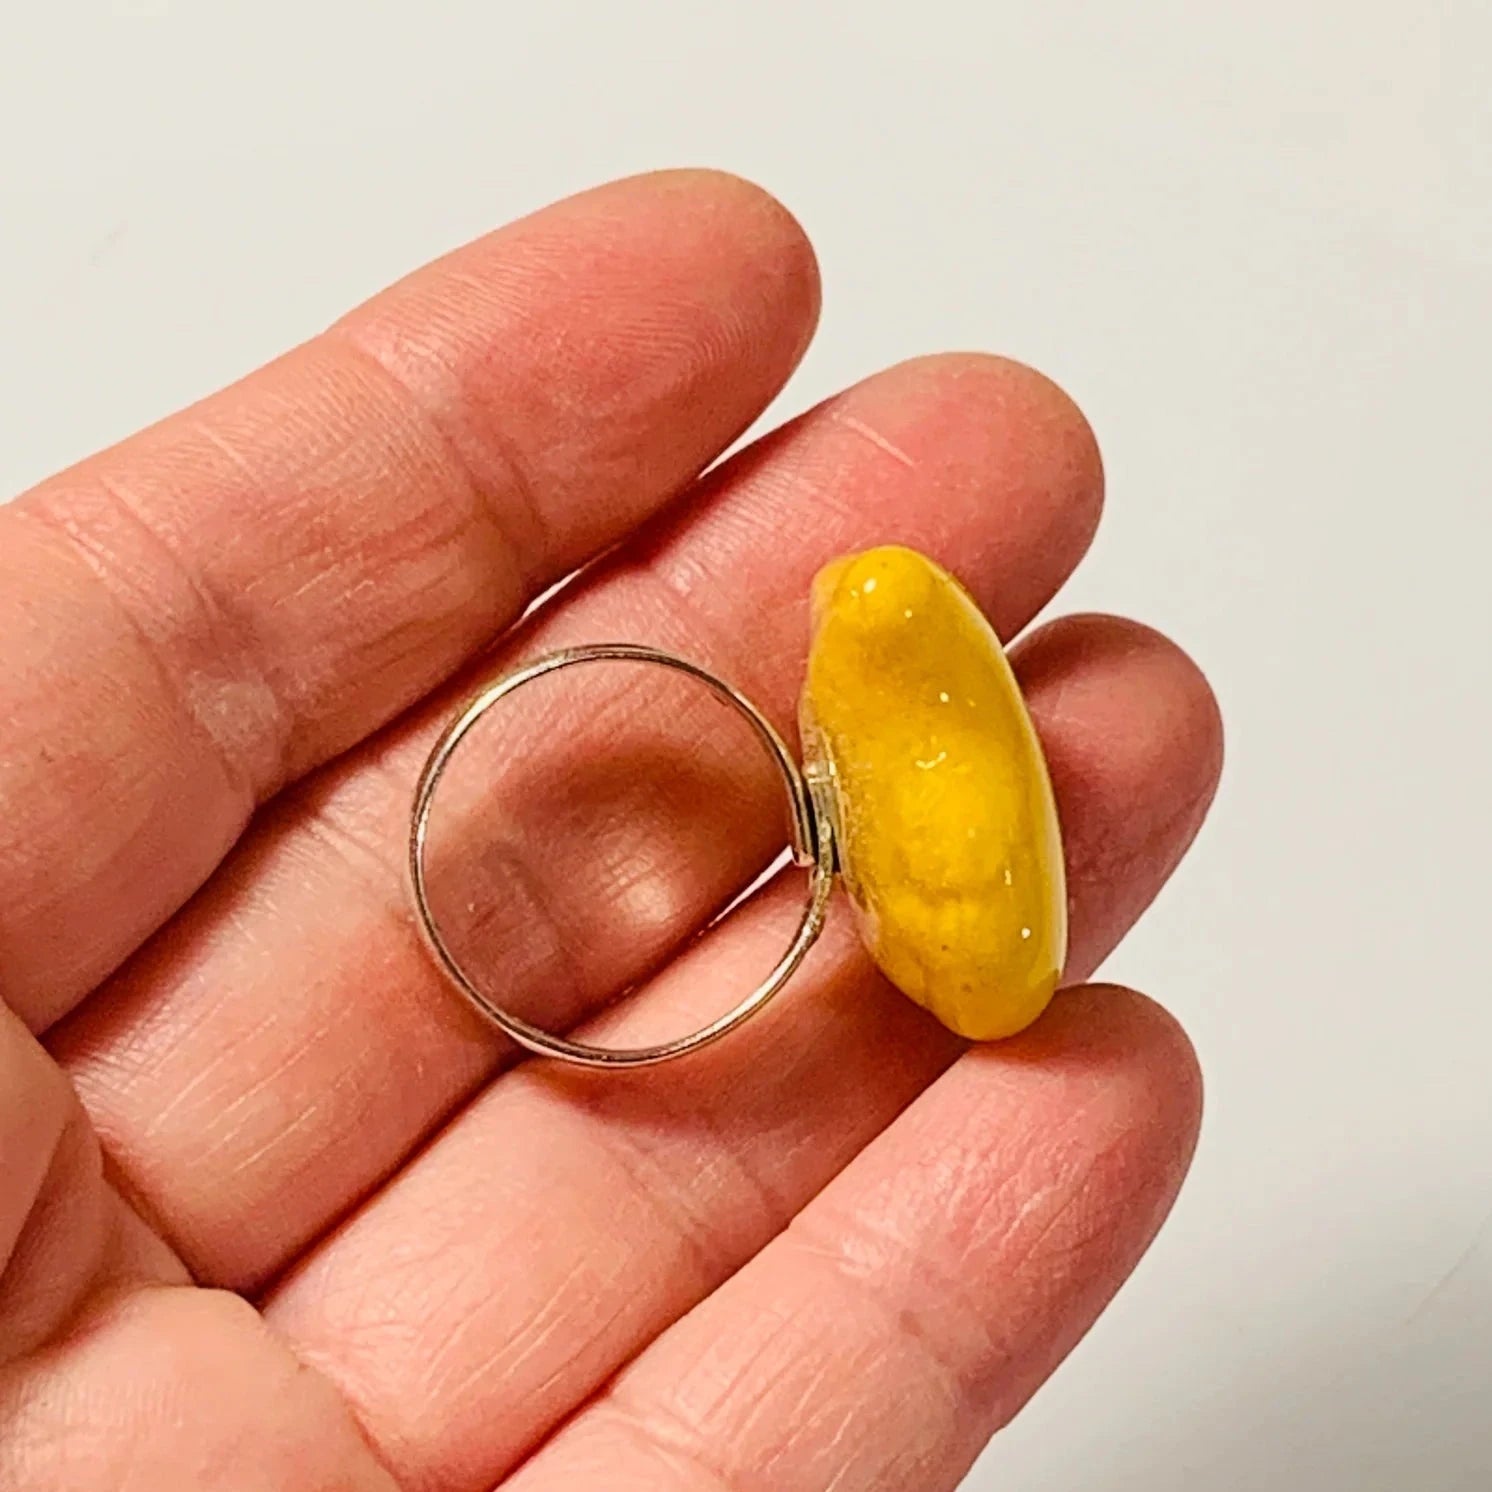 Goldfish snack ring laying on side to show metal band attachment